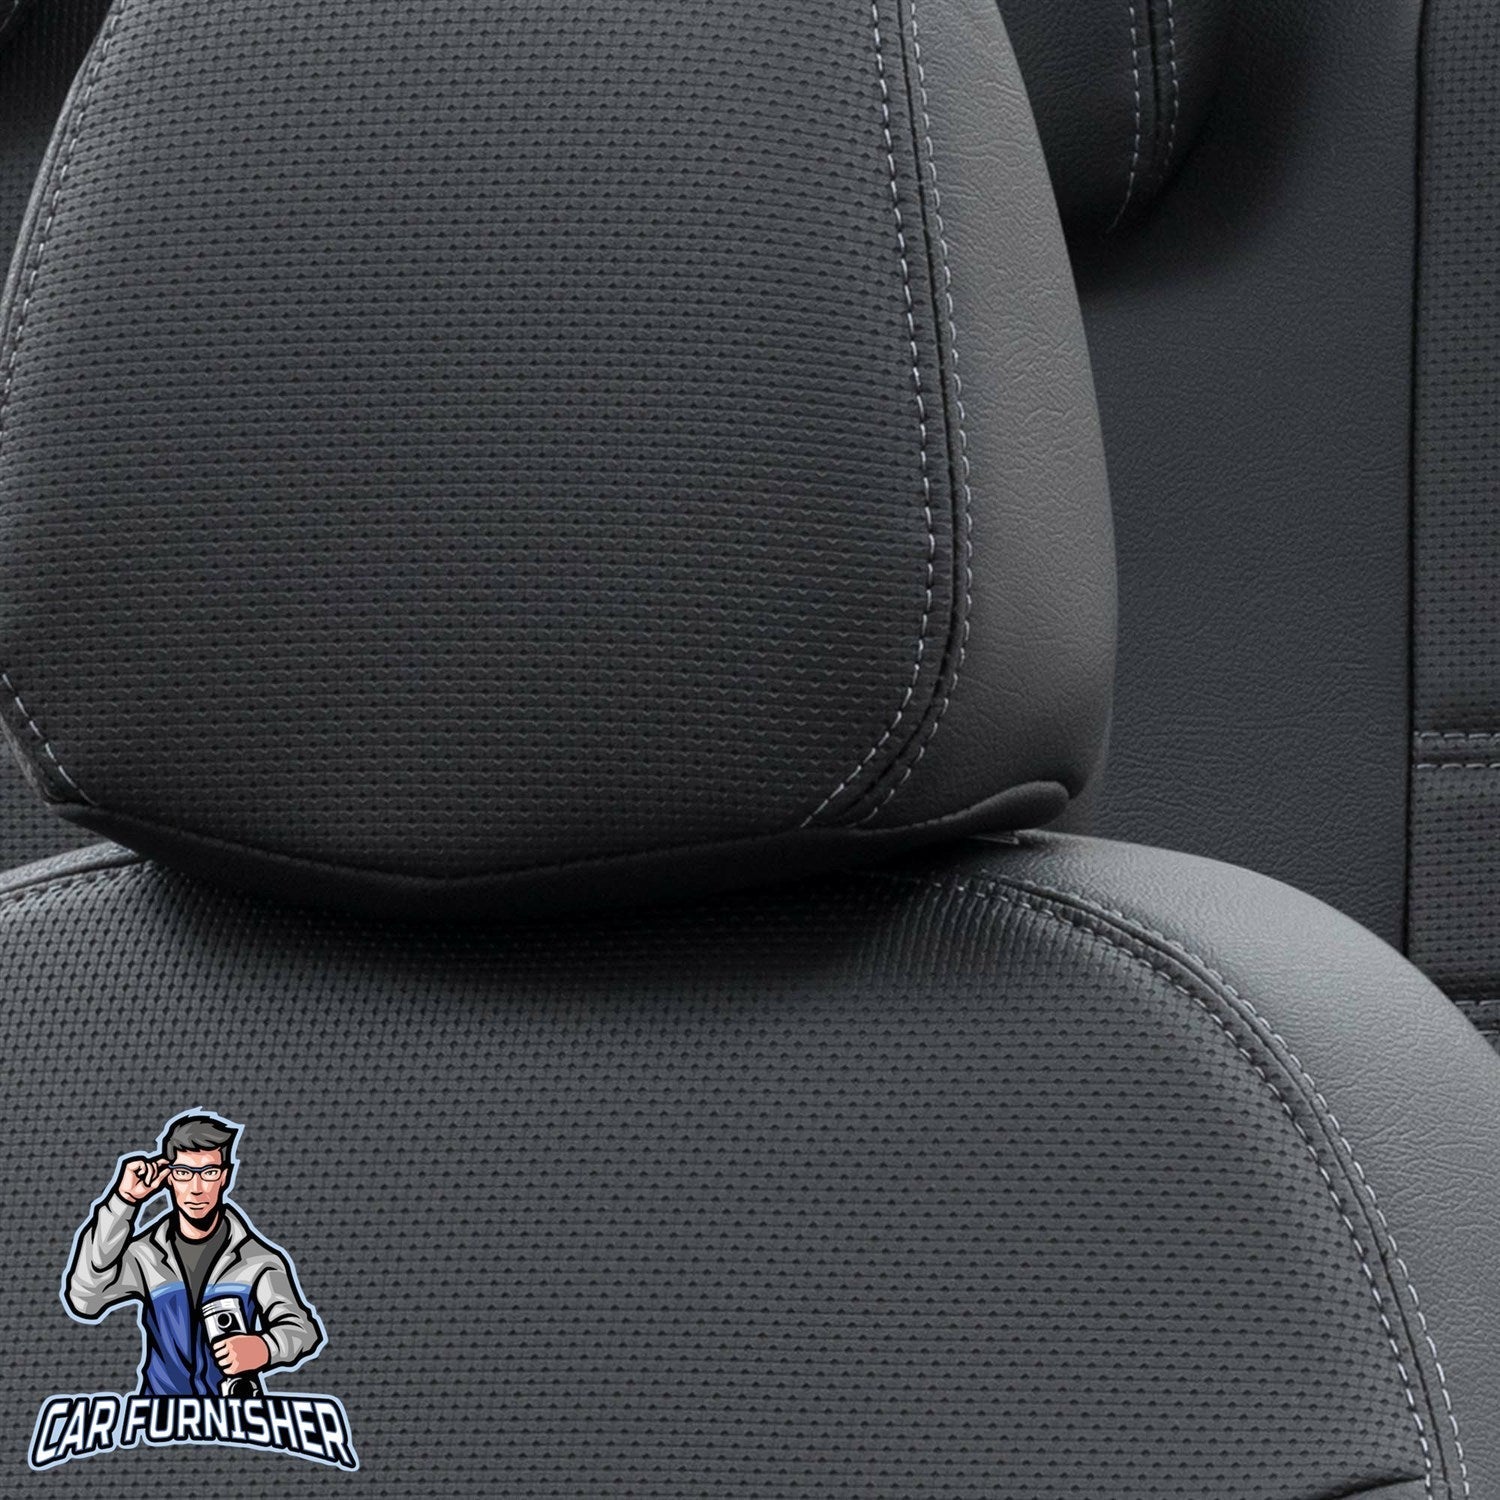 Nissan Pathfinder Seat Cover New York Leather Design Black Leather